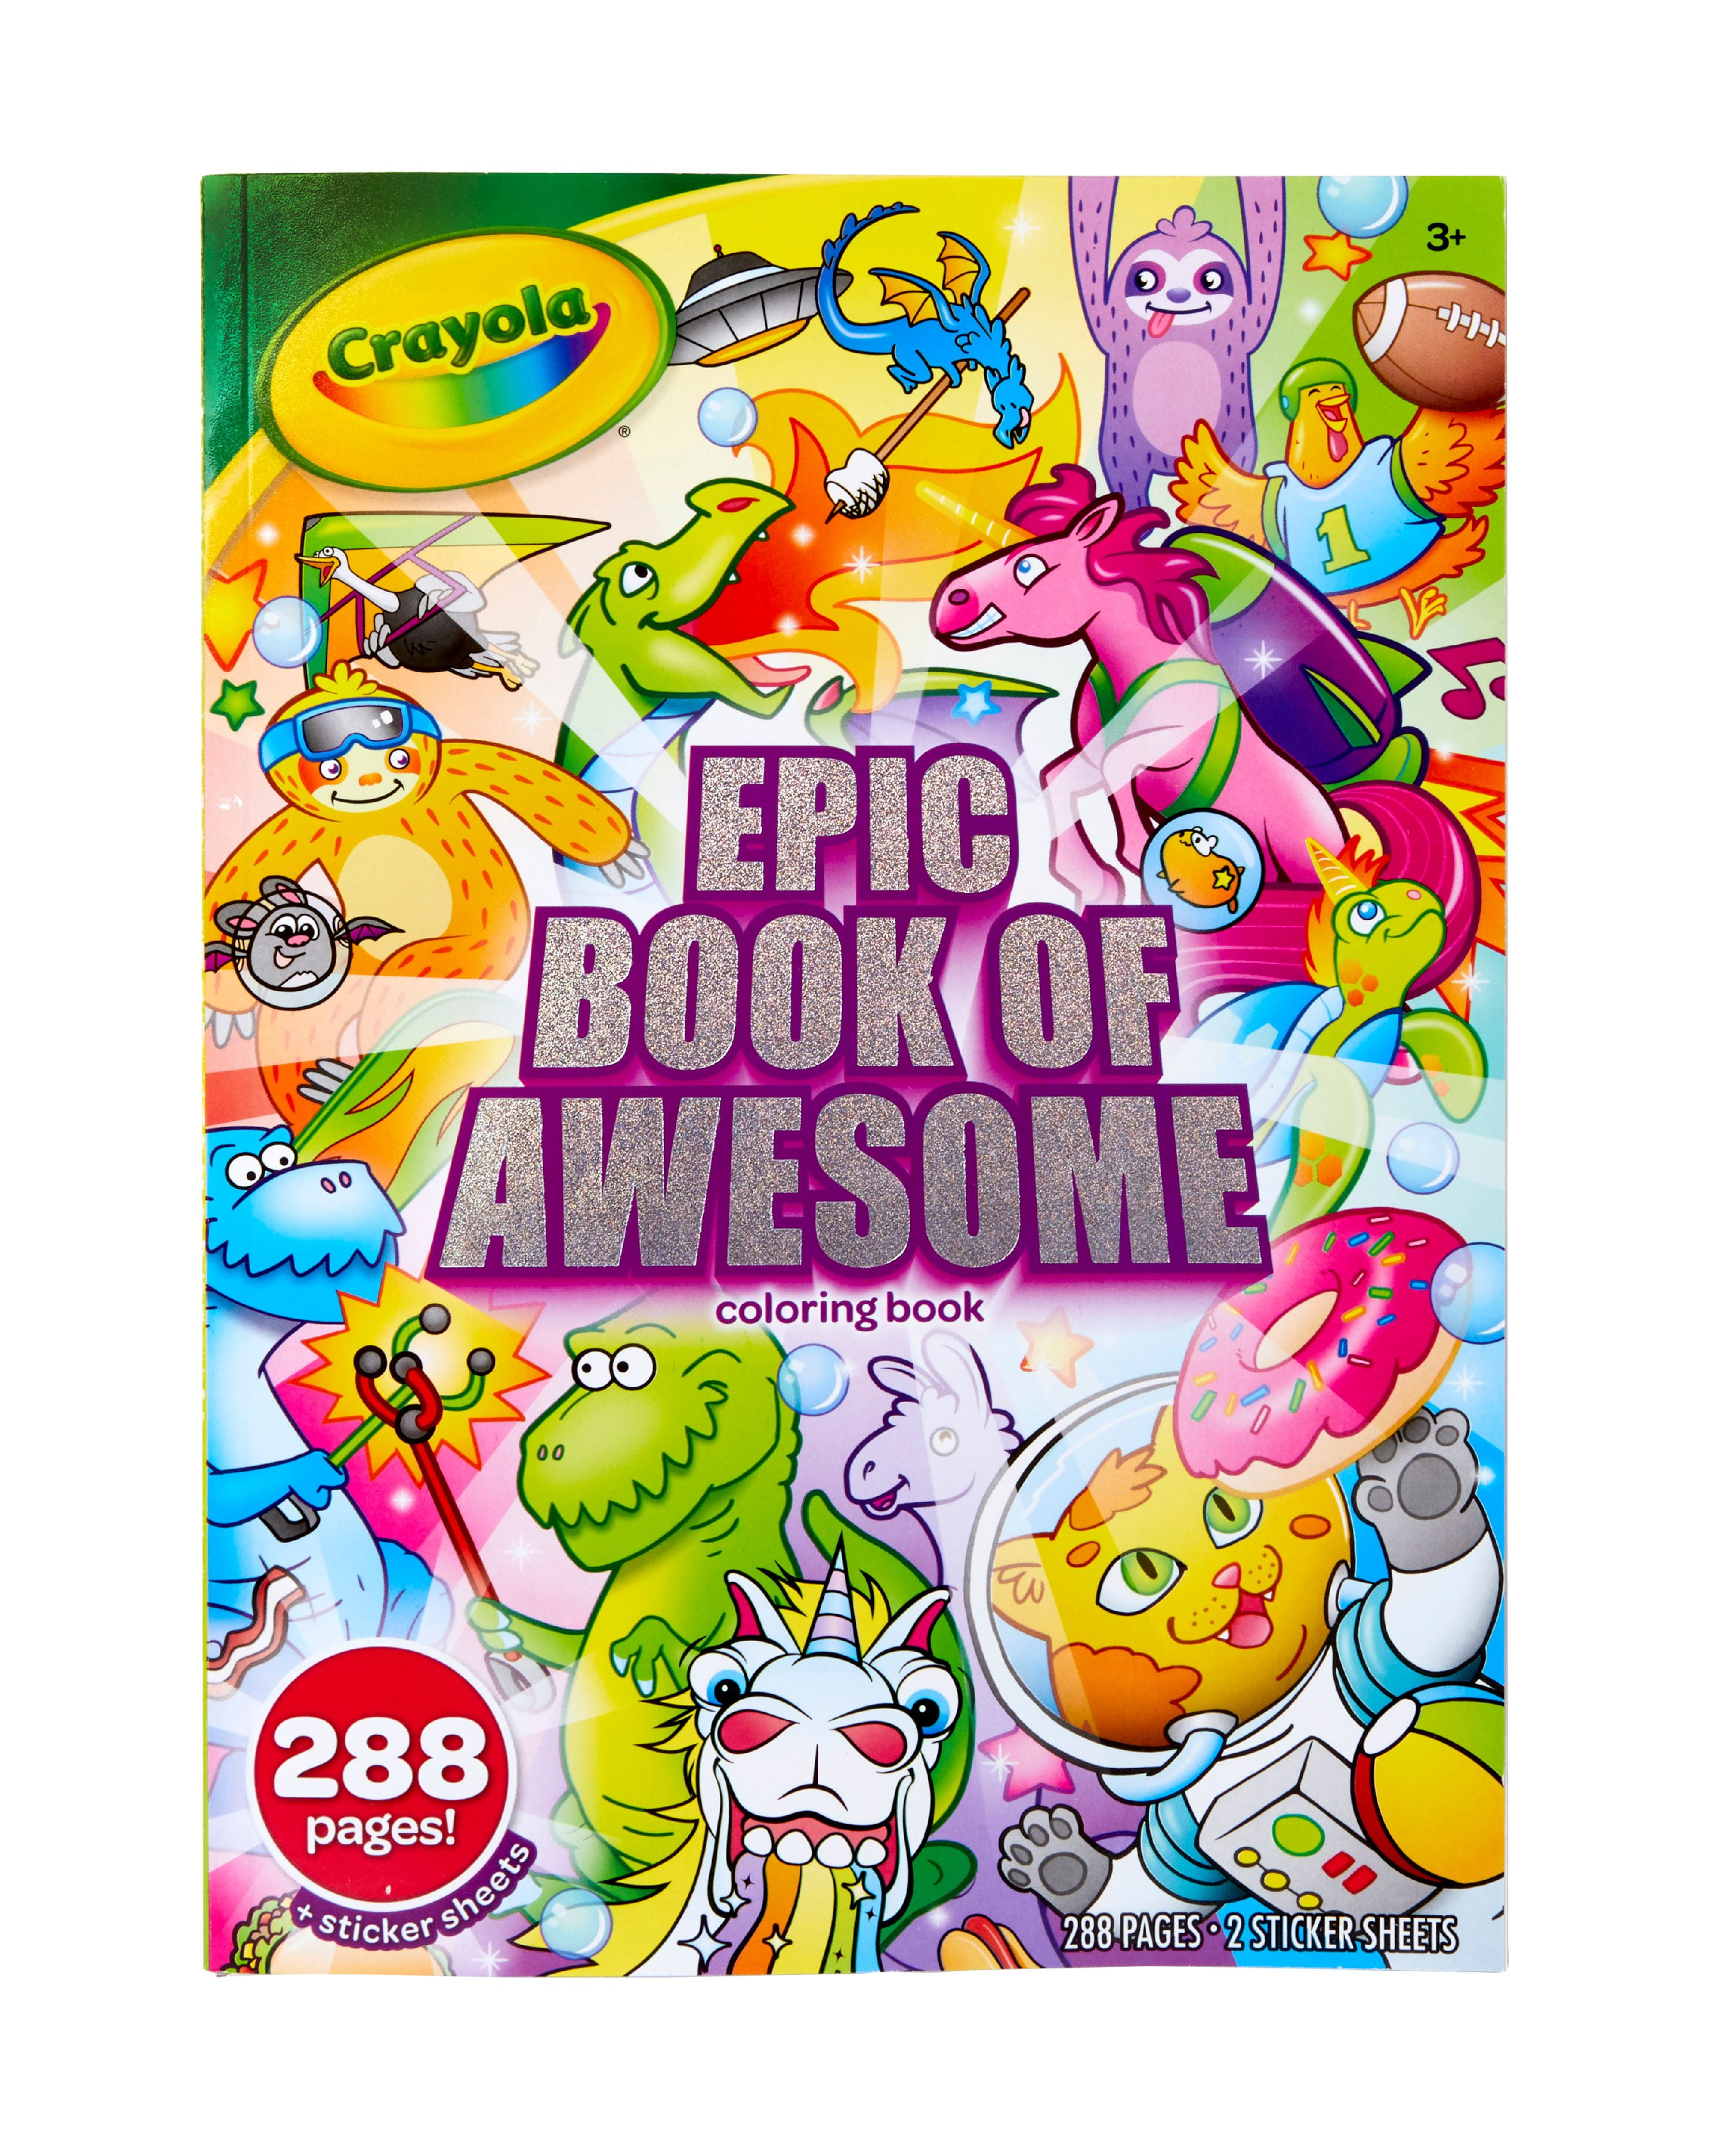 Crayola Epic Book of Awesome Coloring Book, 288 Pages, Gift for Kids